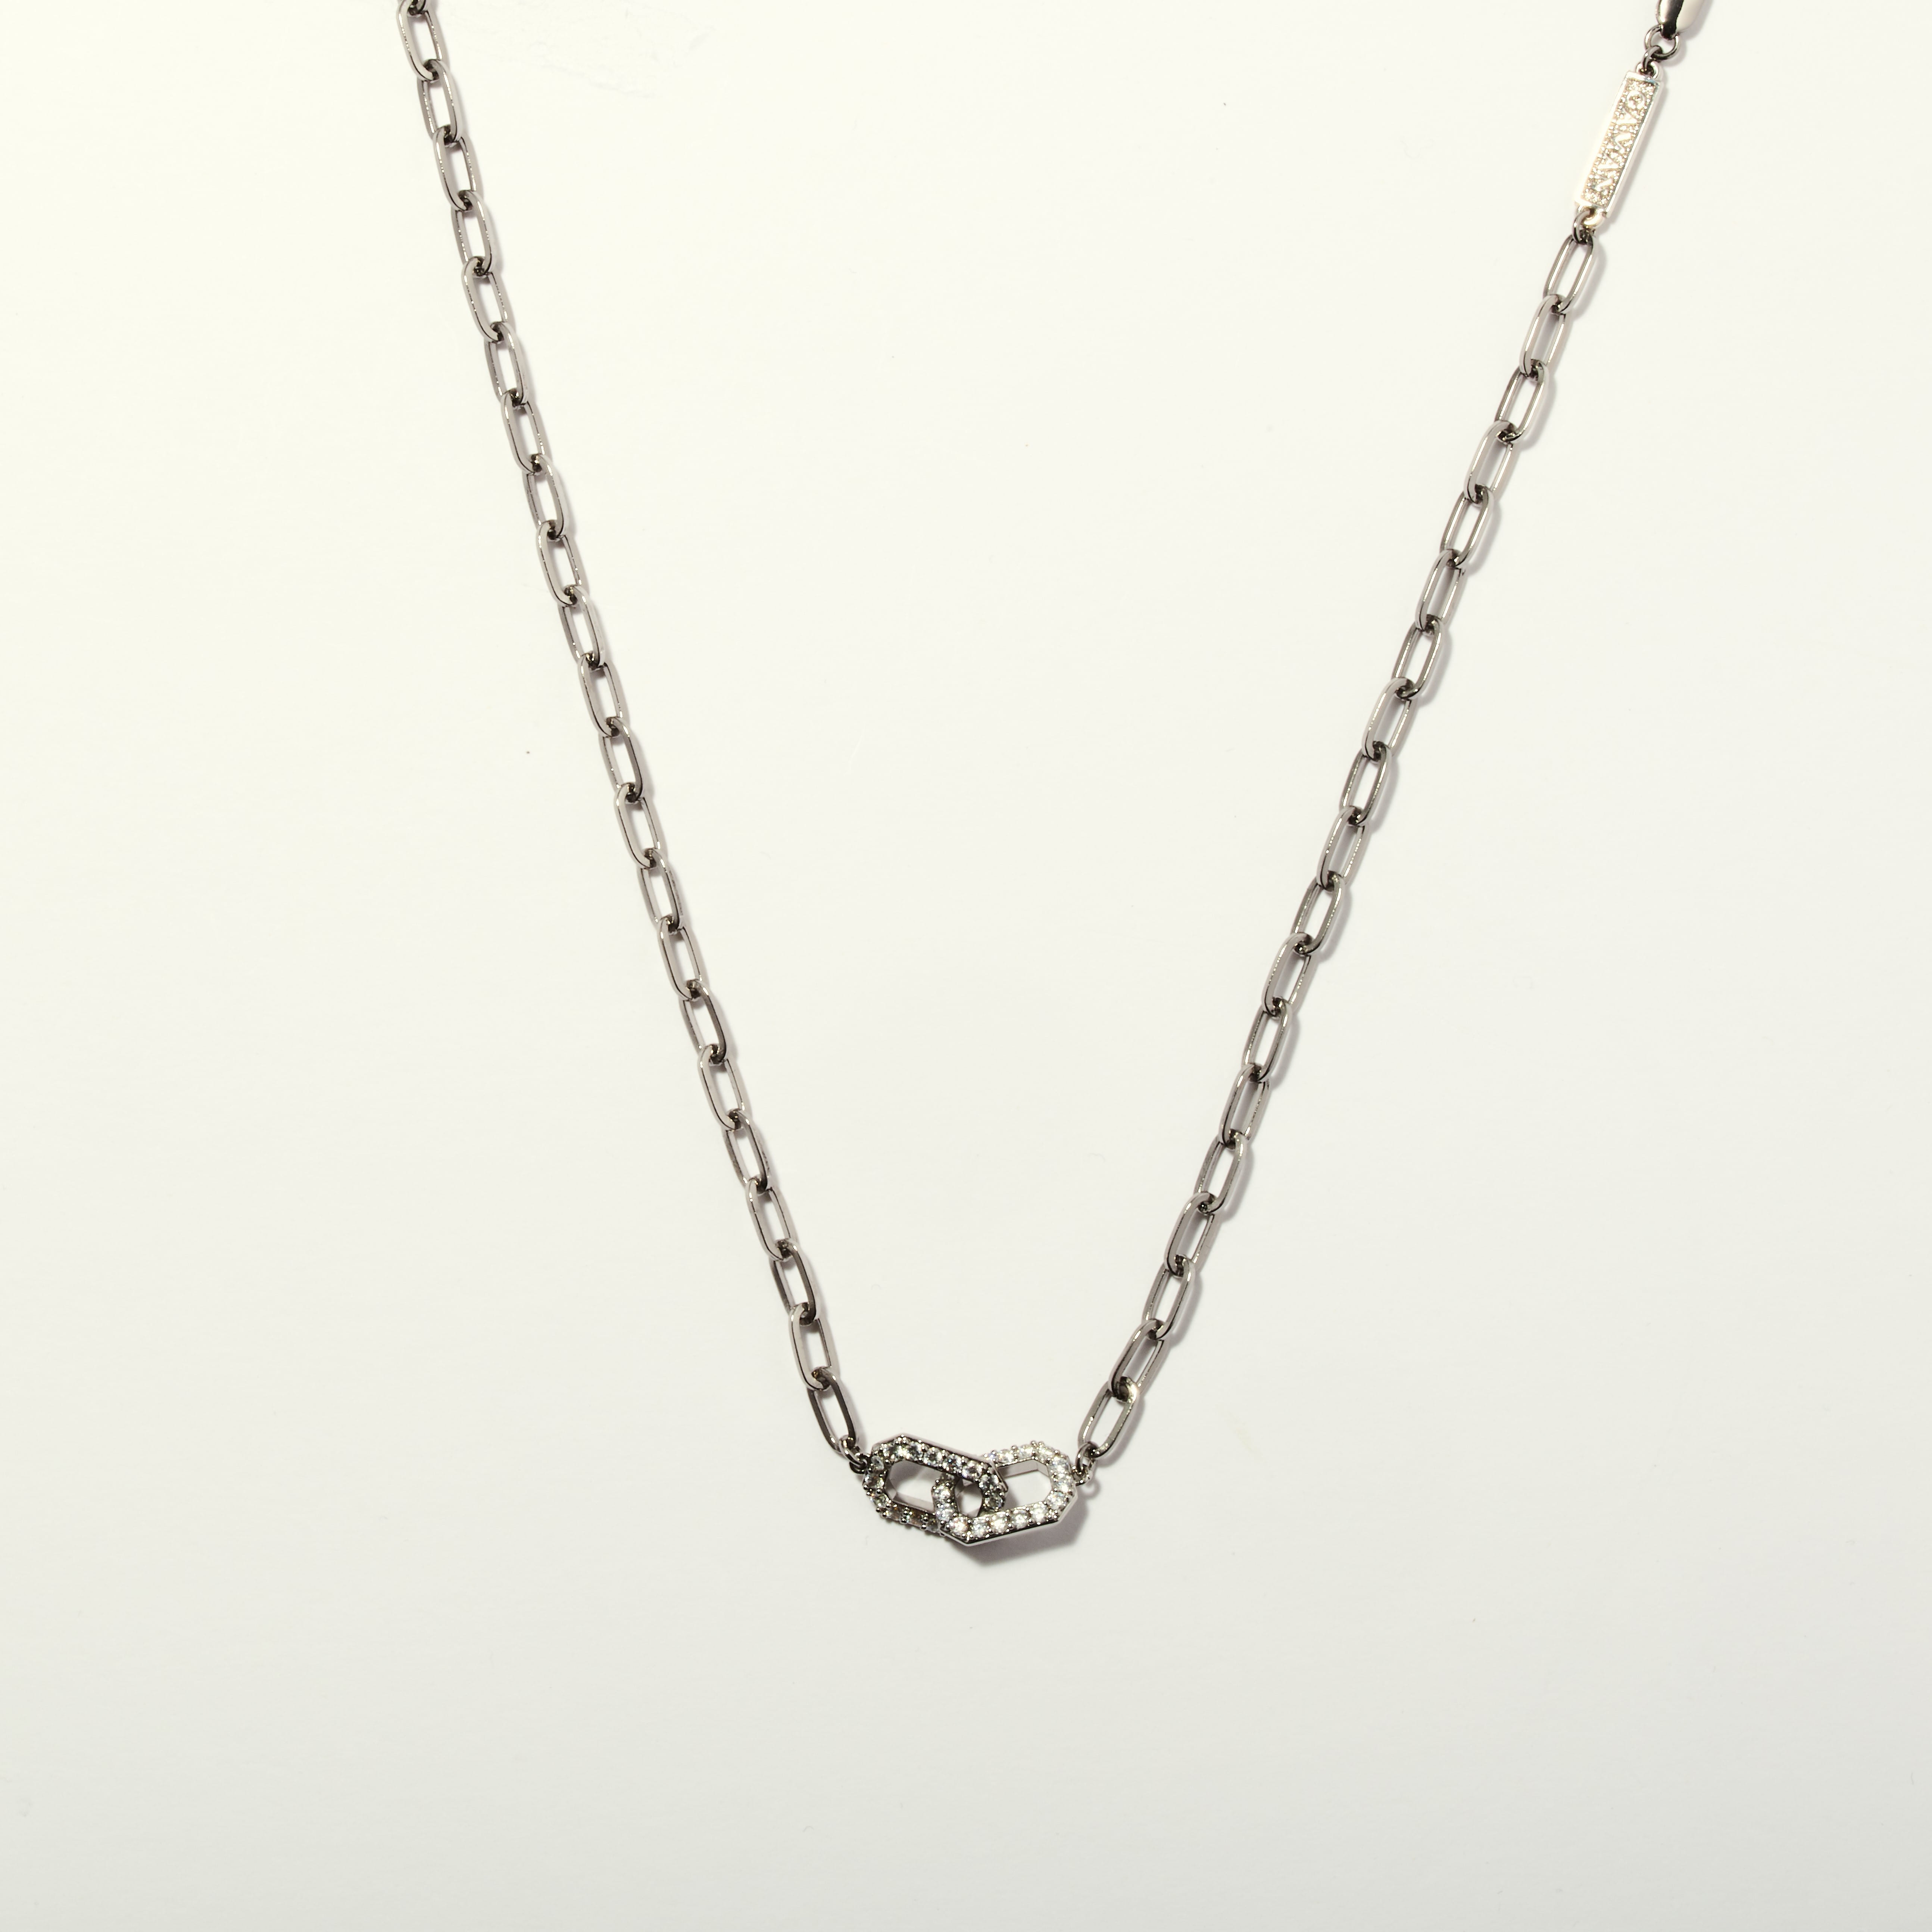 COMMITMENT PAVE SILVER LINK NECKLACE